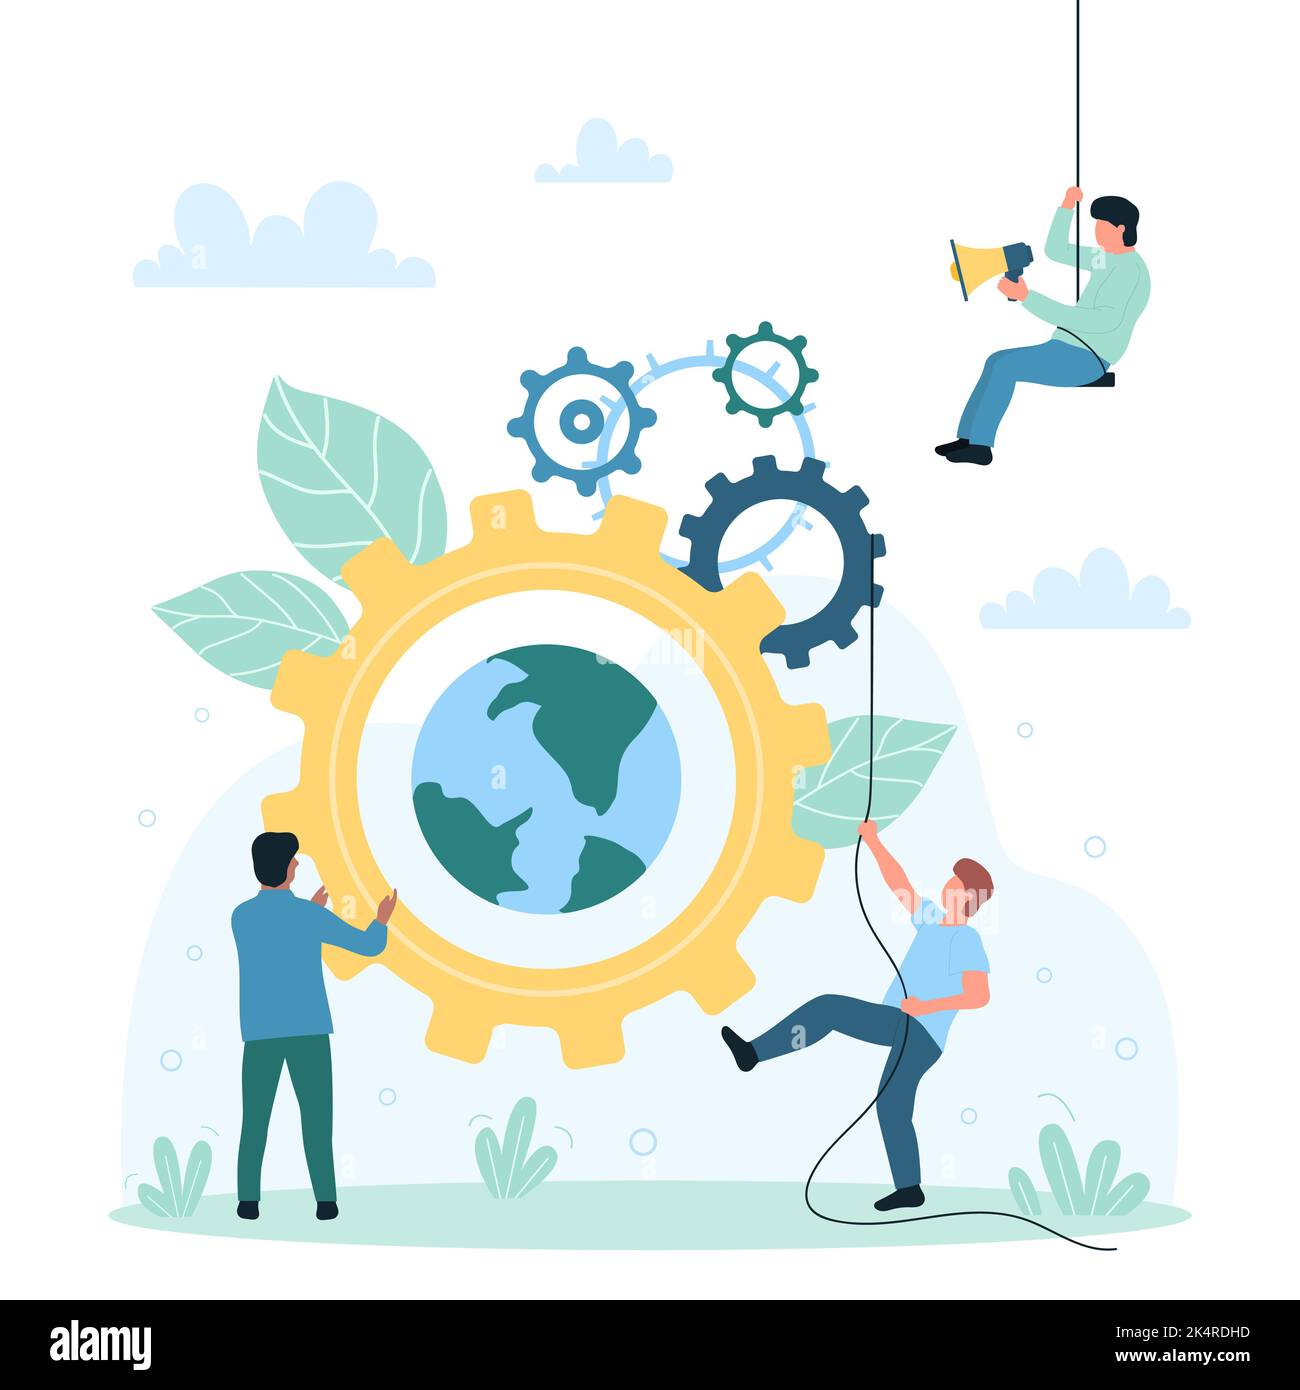 Global business communication, cooperation vector illustration. Cartoon tiny people moving mechanism with cogwheels, gears and globe inside, integrate modern technology in company organization Stock Vector